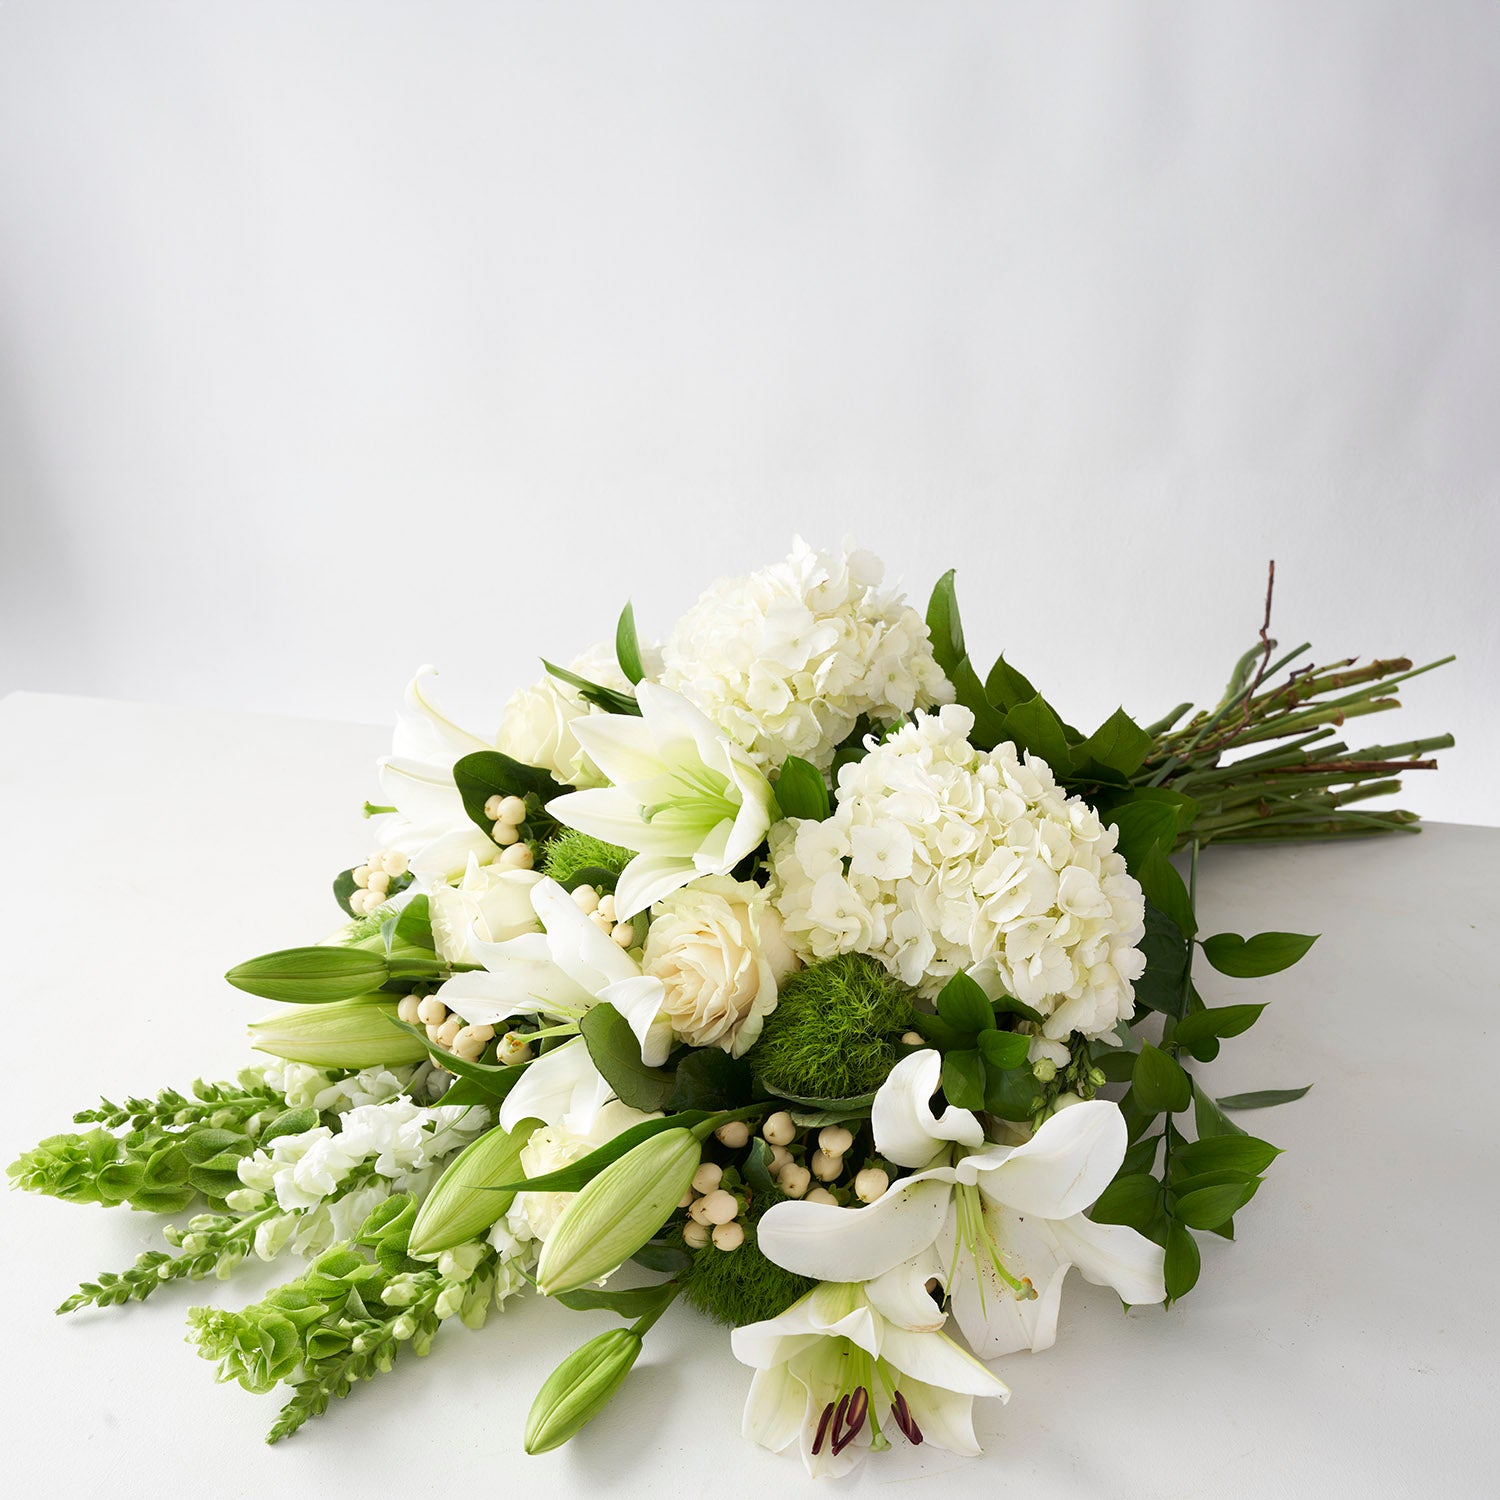 Large bouquet of white lilies, white hydrangea, cream berries and white roses on white background. 